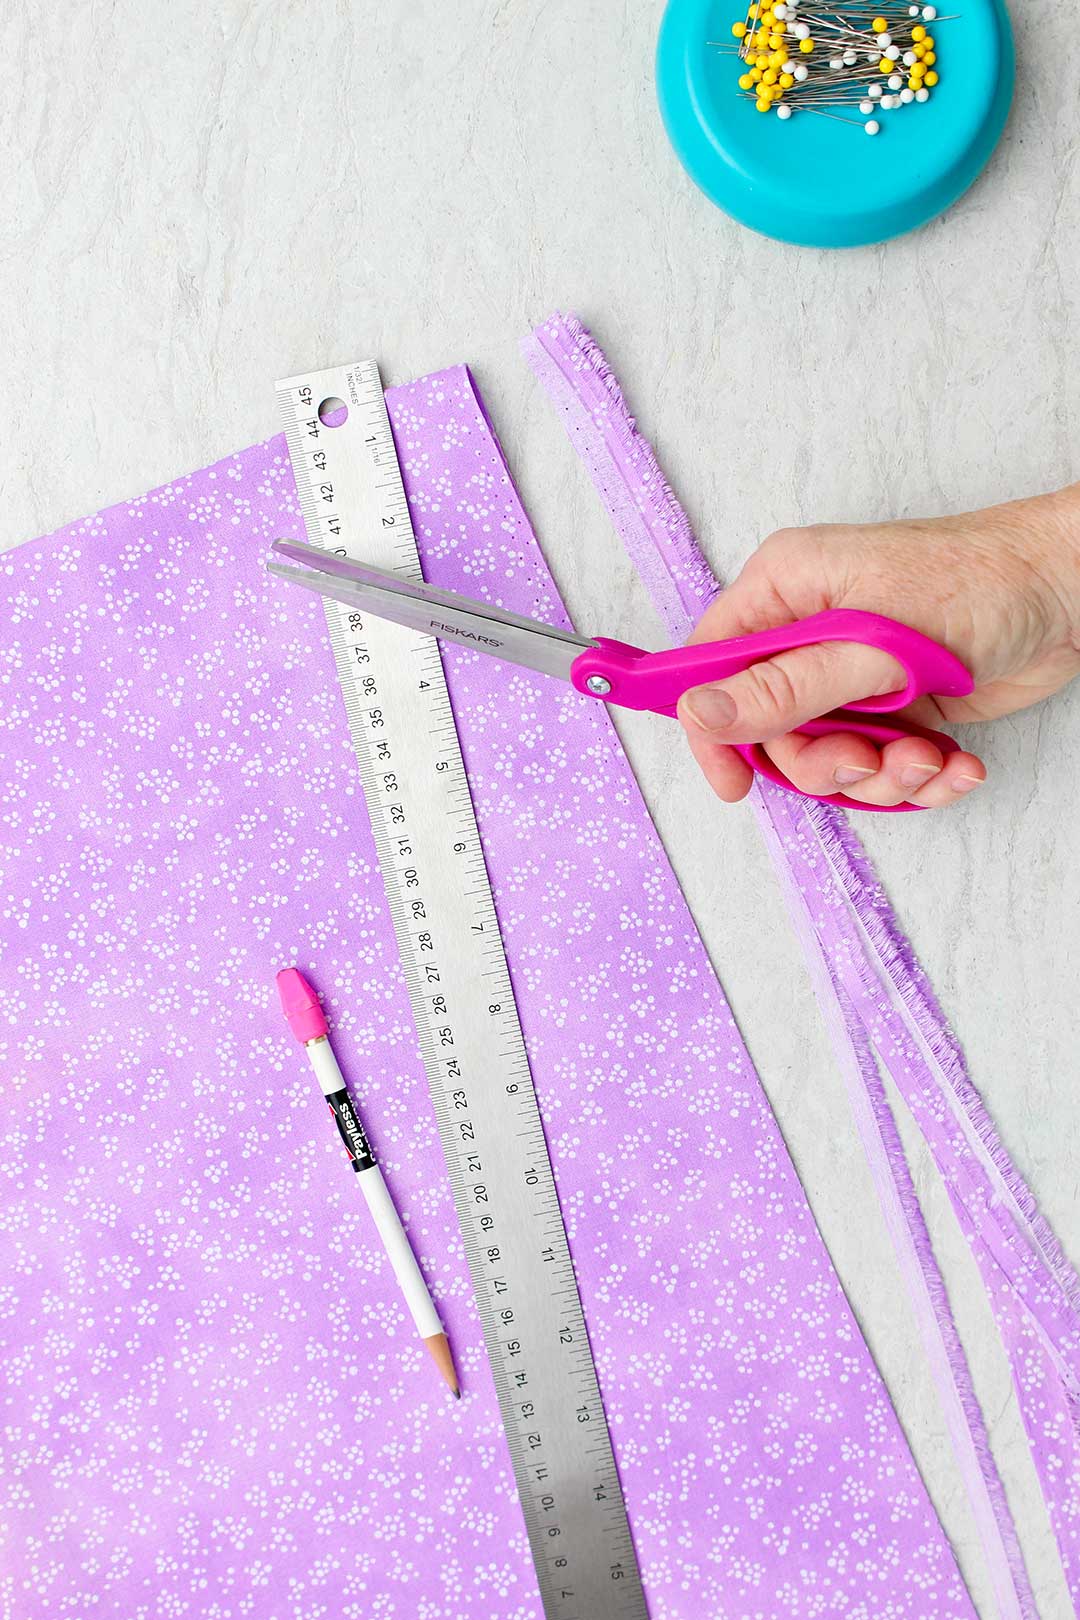 Hand holding a pair of pink scissors near purple fabric with the edge cut off and a metal ruler, straight pin holder and pencil.